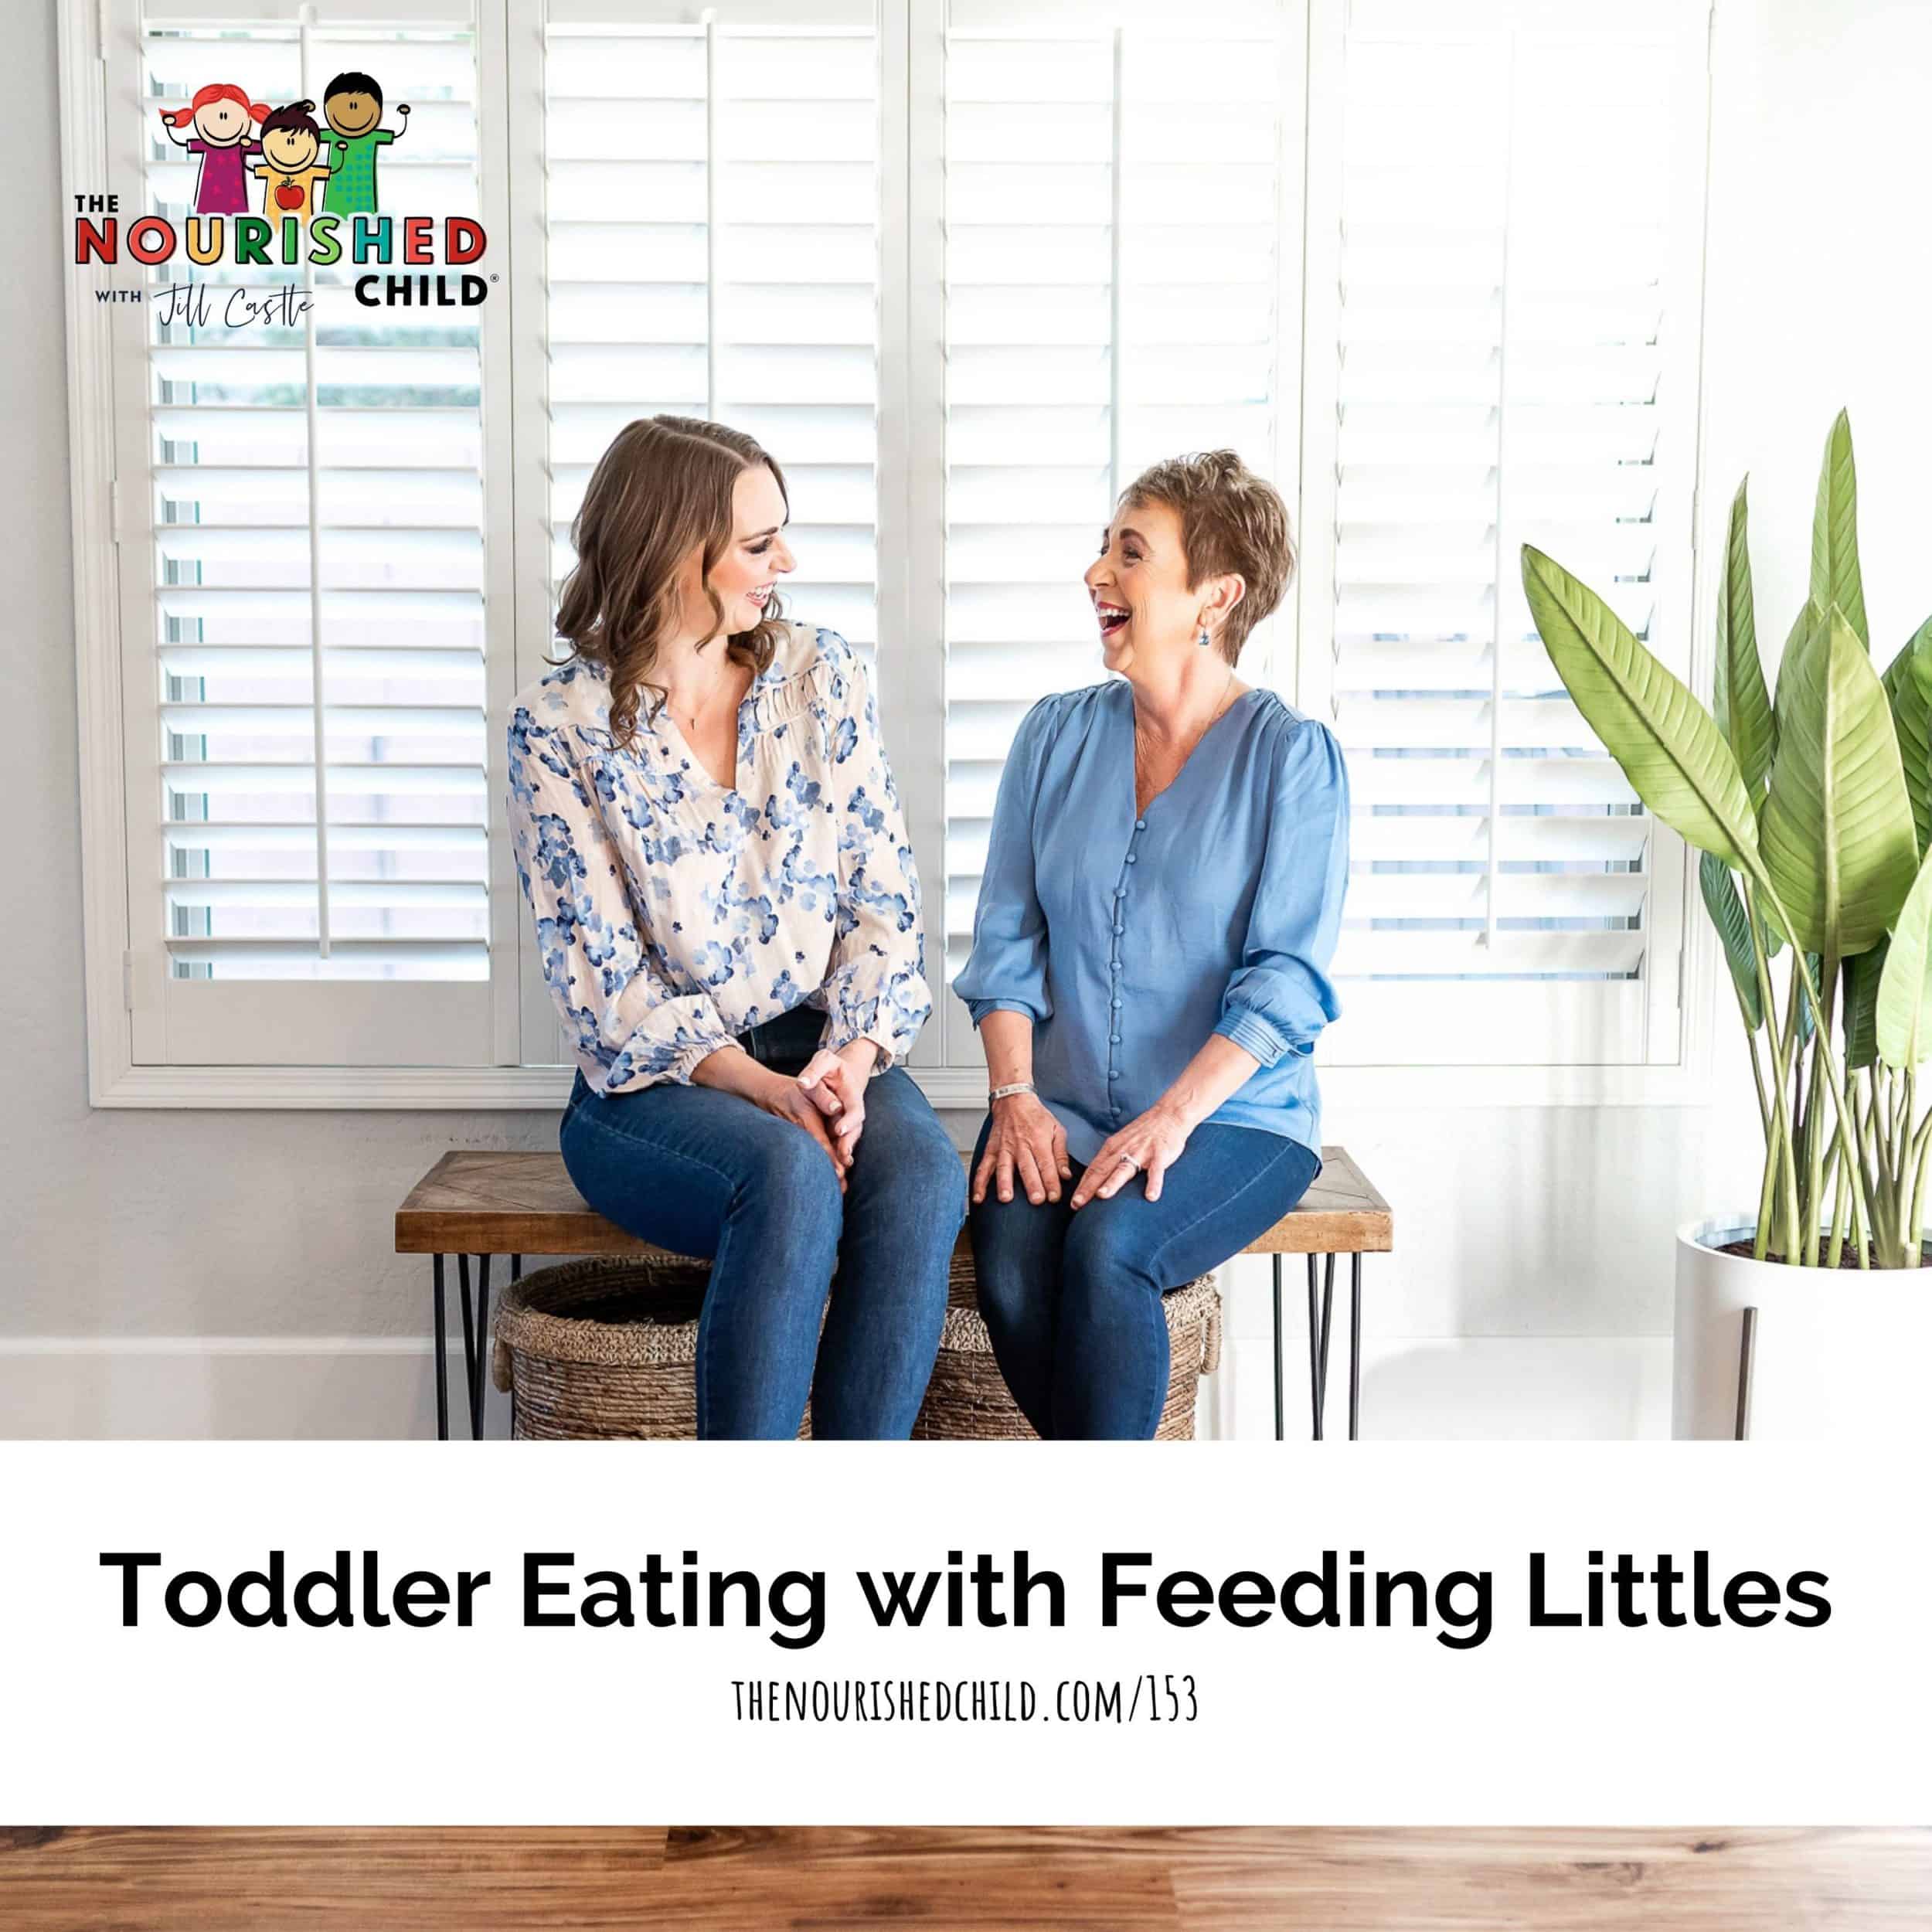 Feeding Littles on The Nourished Child podcast